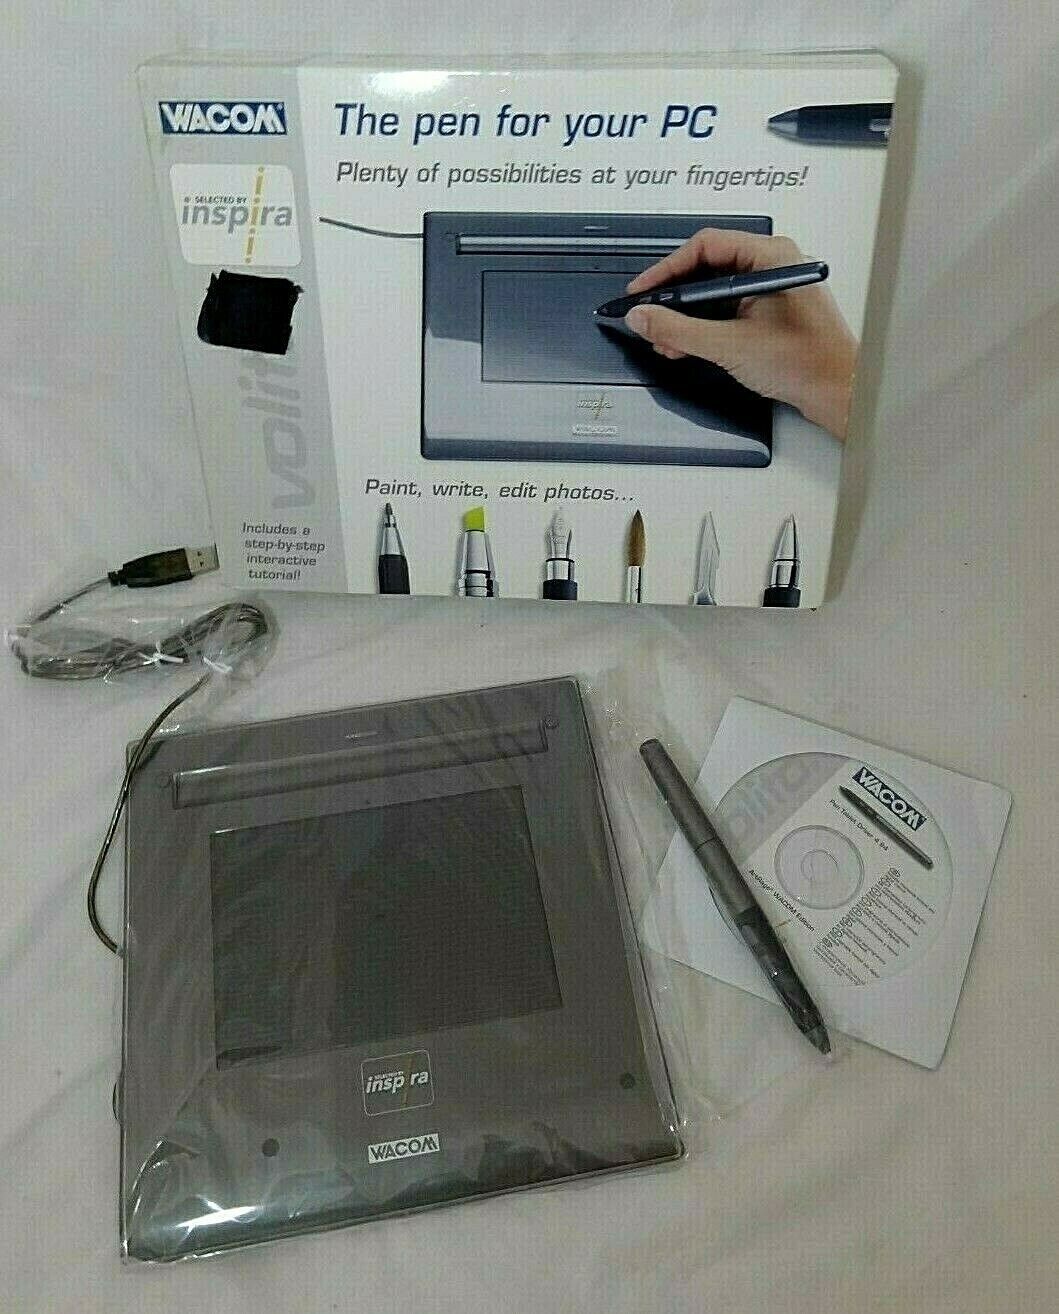 Wacom CTF-420 Drawing, Painting, Editing Tablet w/ Pen for PC - NEW